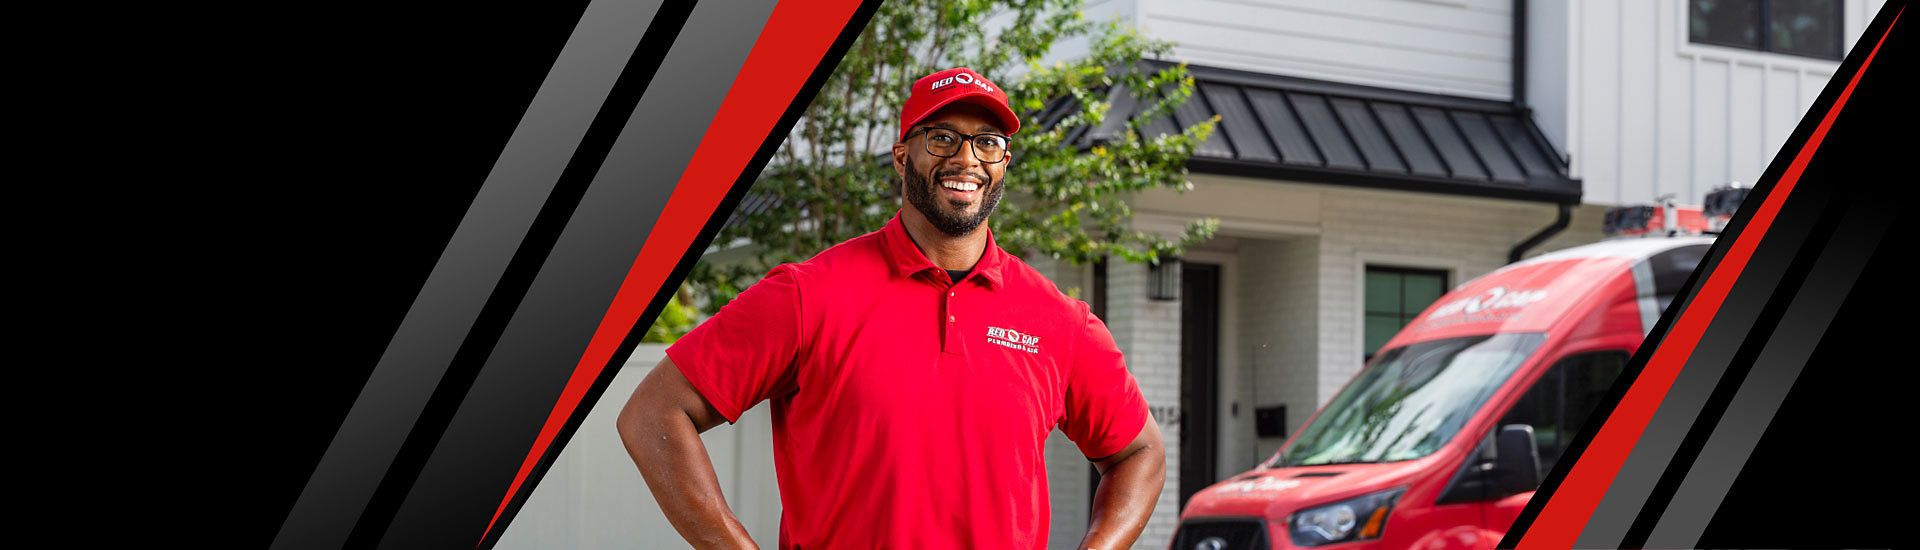 A smiling Red Cap technician standing in front of a house, and a Red Cap truck is parked behind